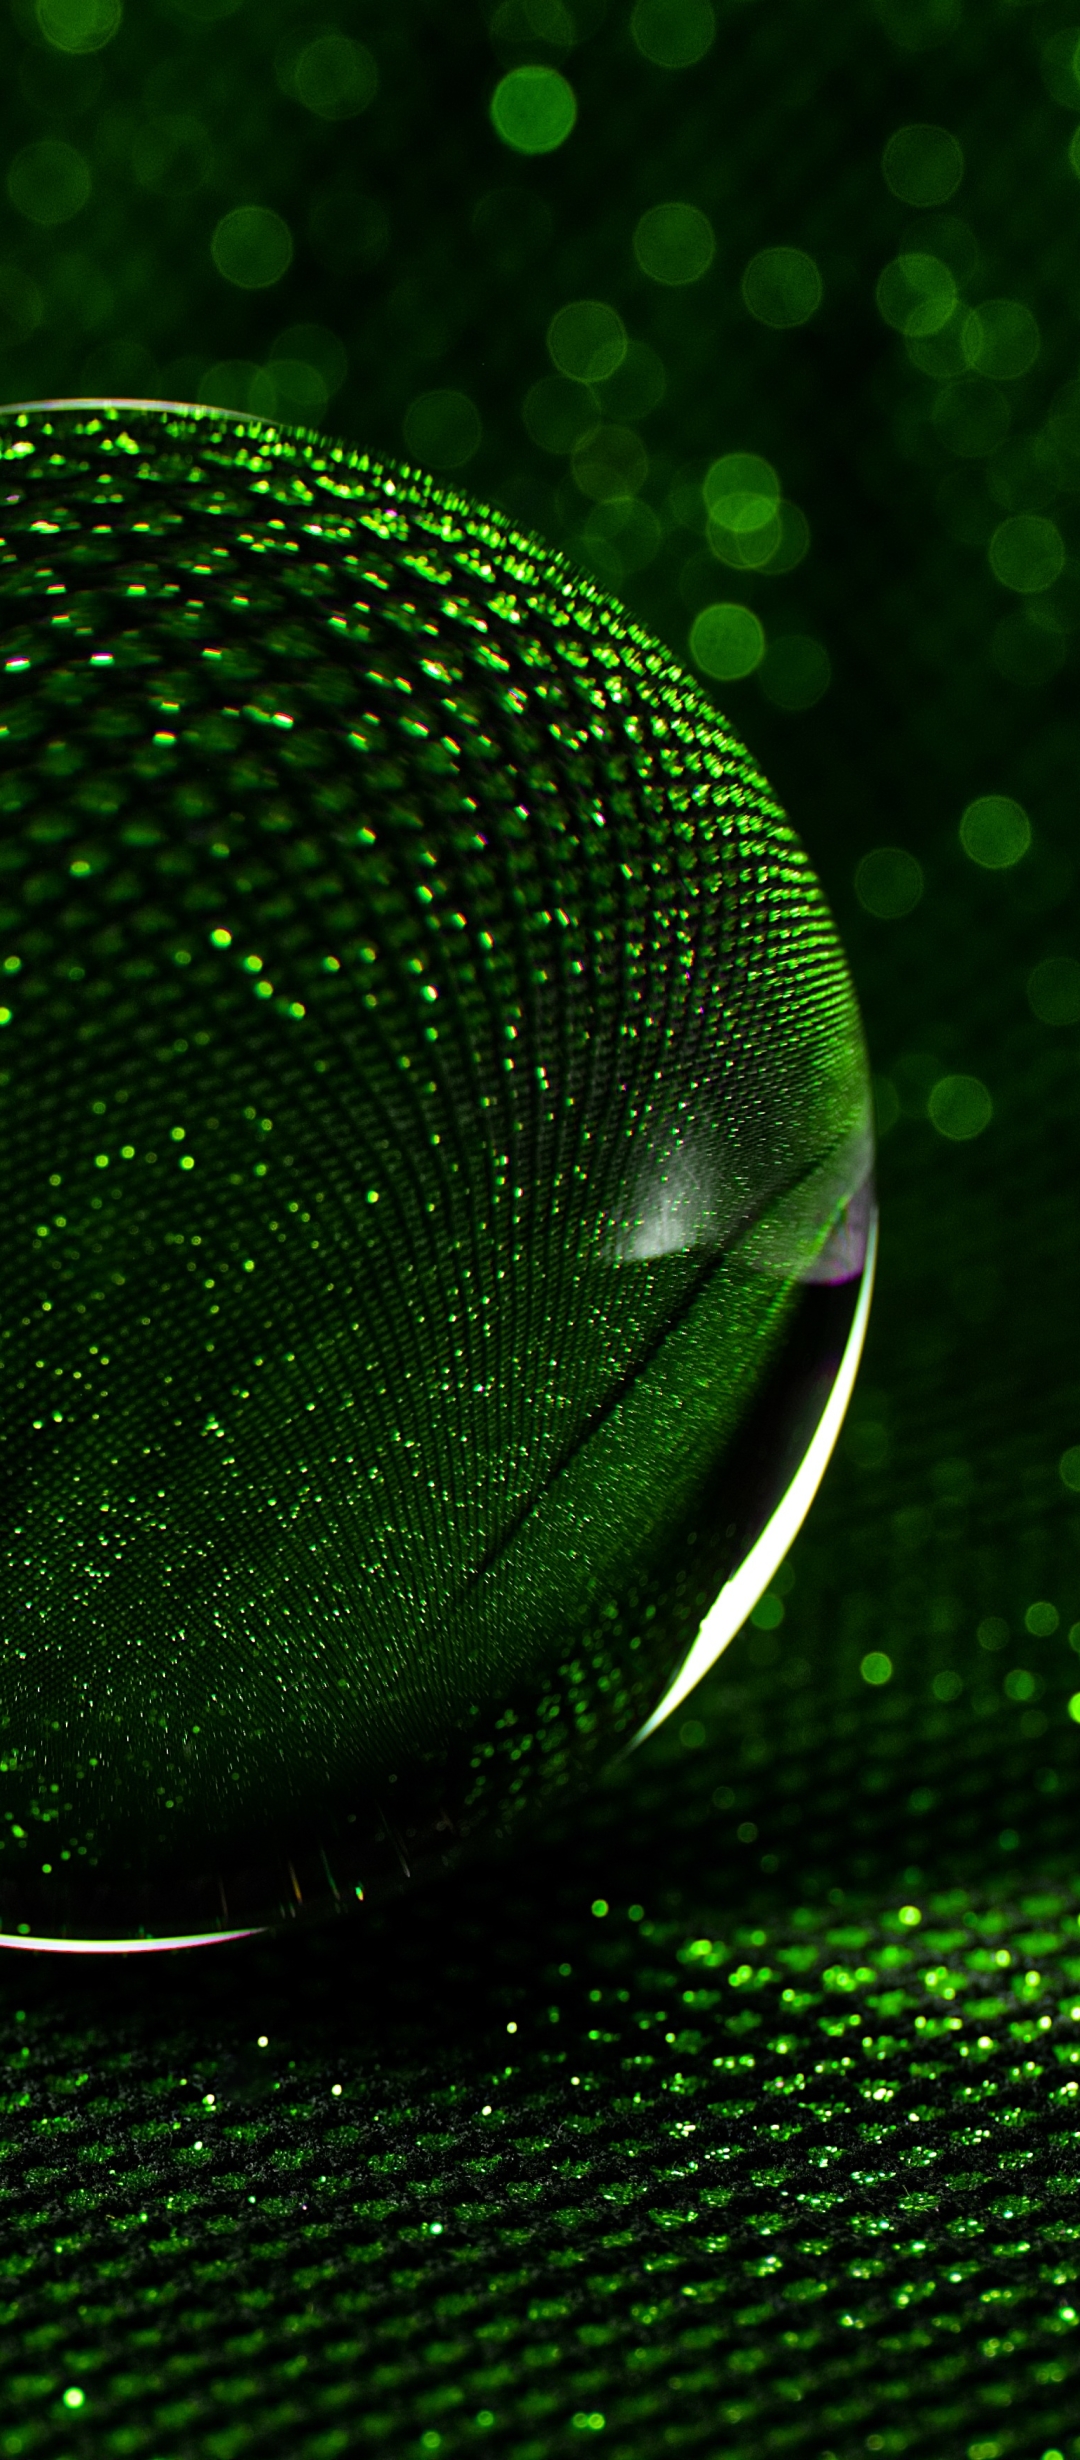 1421338 free wallpaper 720x1280 for phone, download images abstract, green, glitter, sphere 720x1280 for mobile